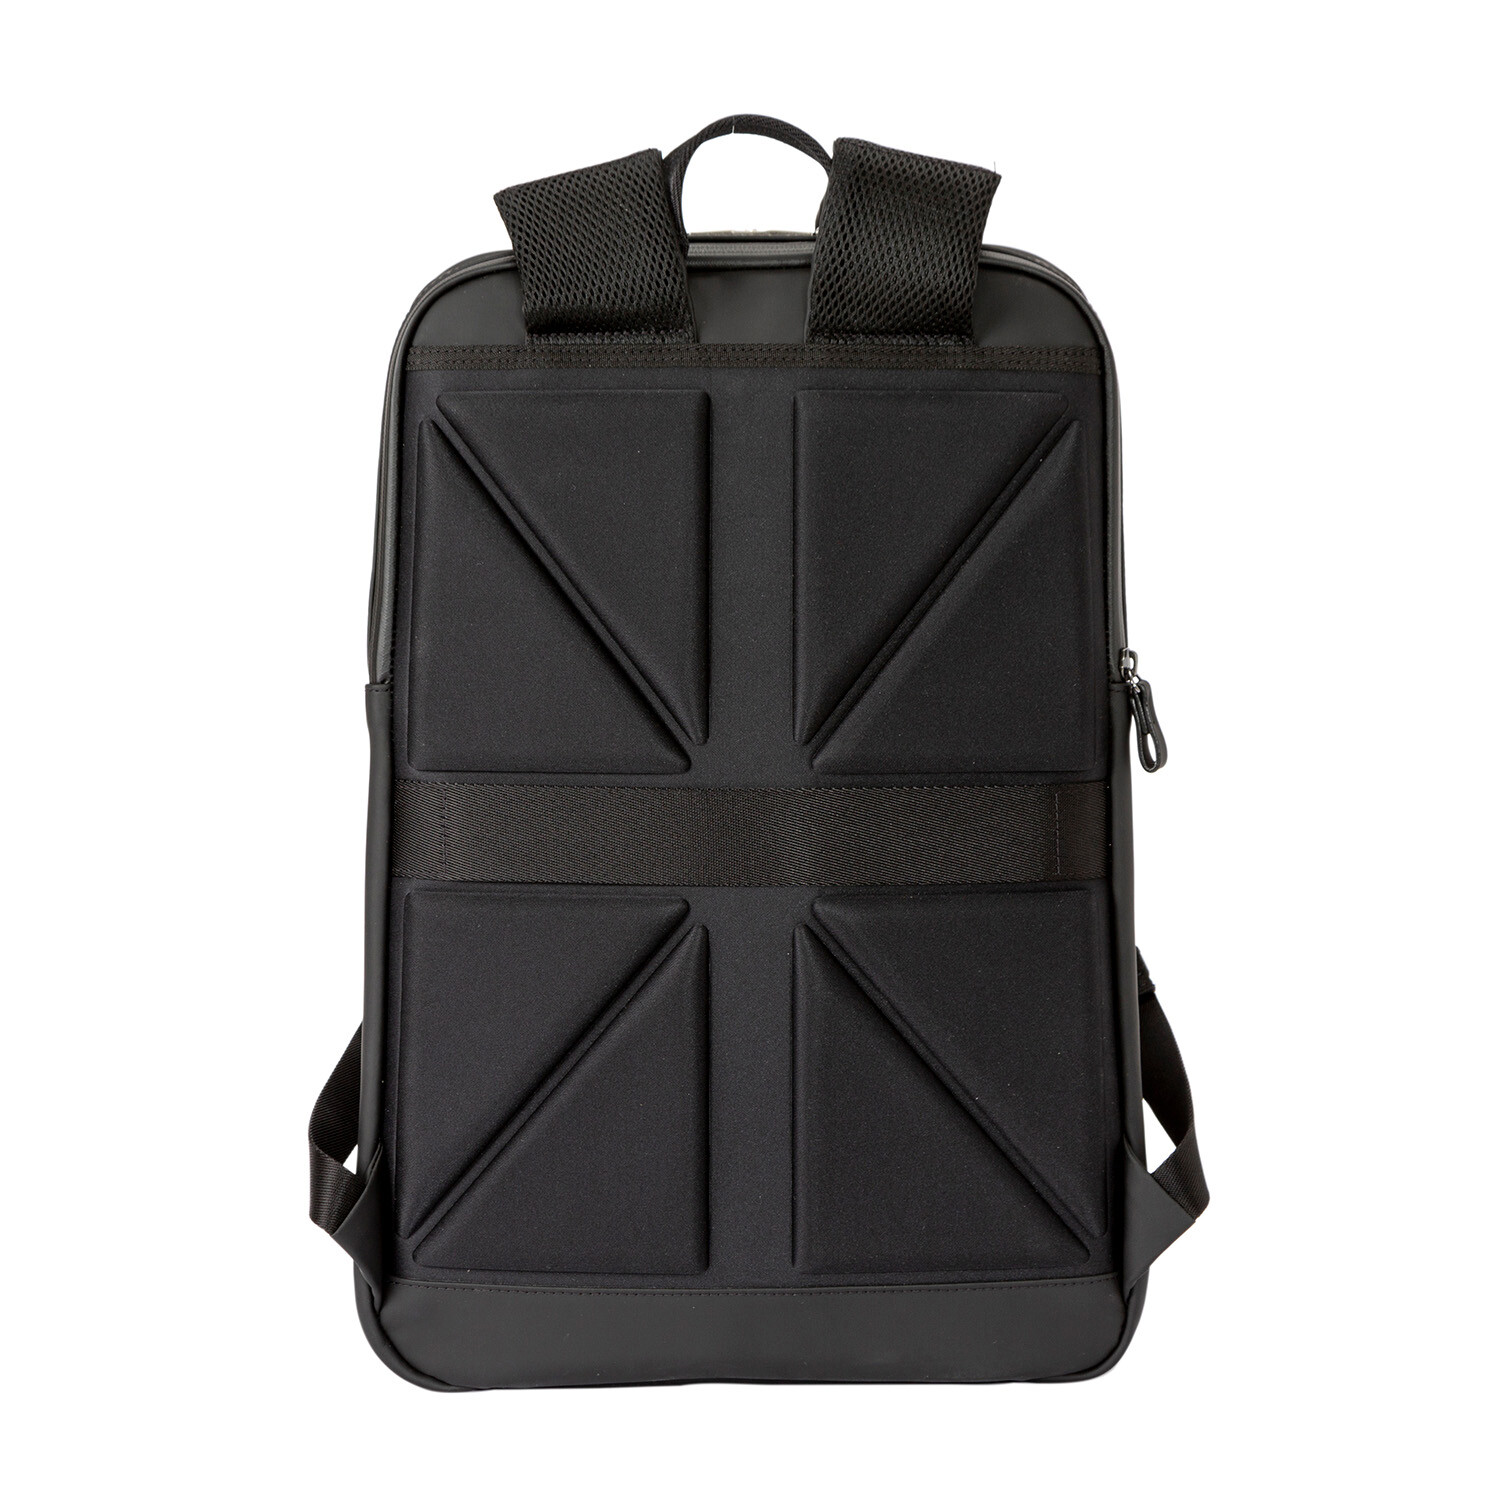 Tondo Backpack // Black - ARTPHERE Bags - Touch of Modern